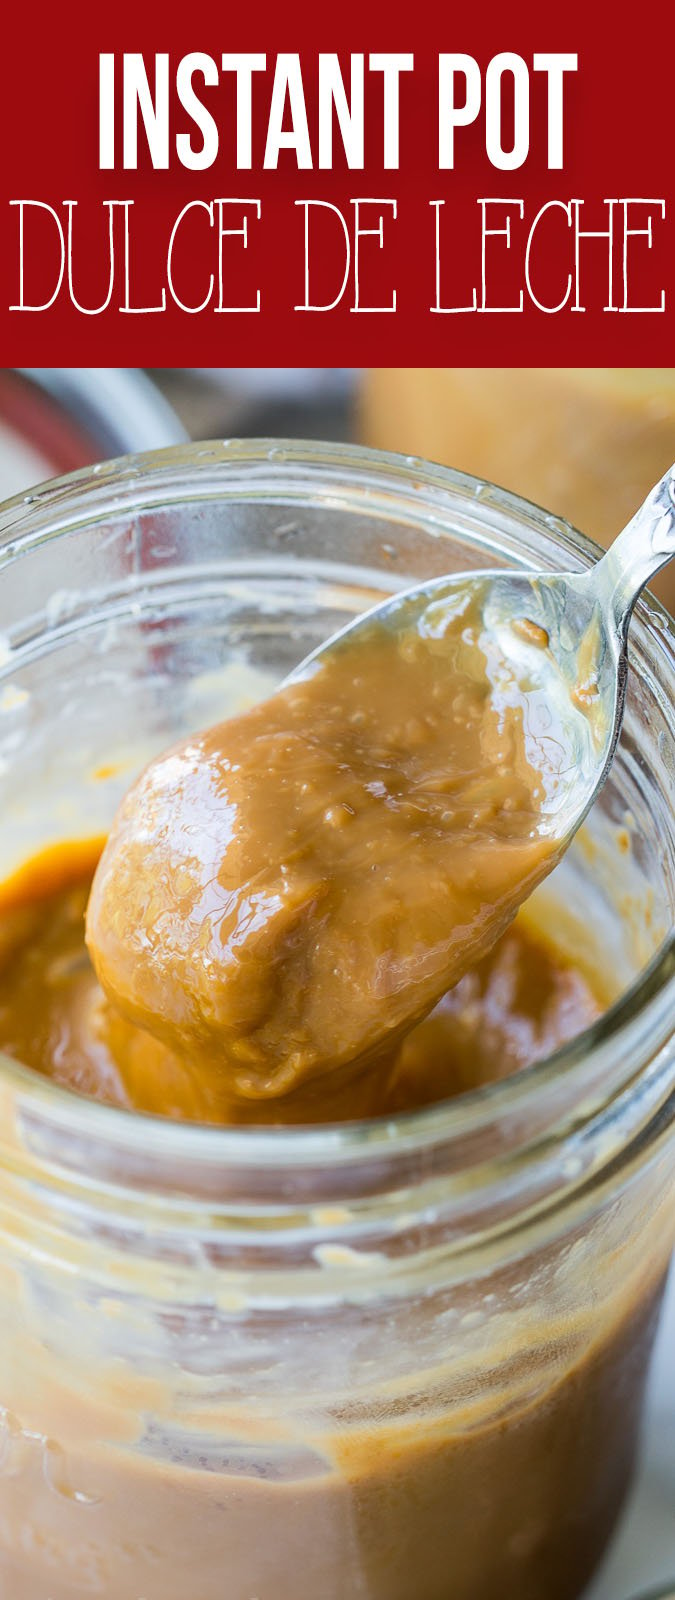 SUPER EASY Instant Pot Dulce de Leche made in mason jars which are perfect for gifting!